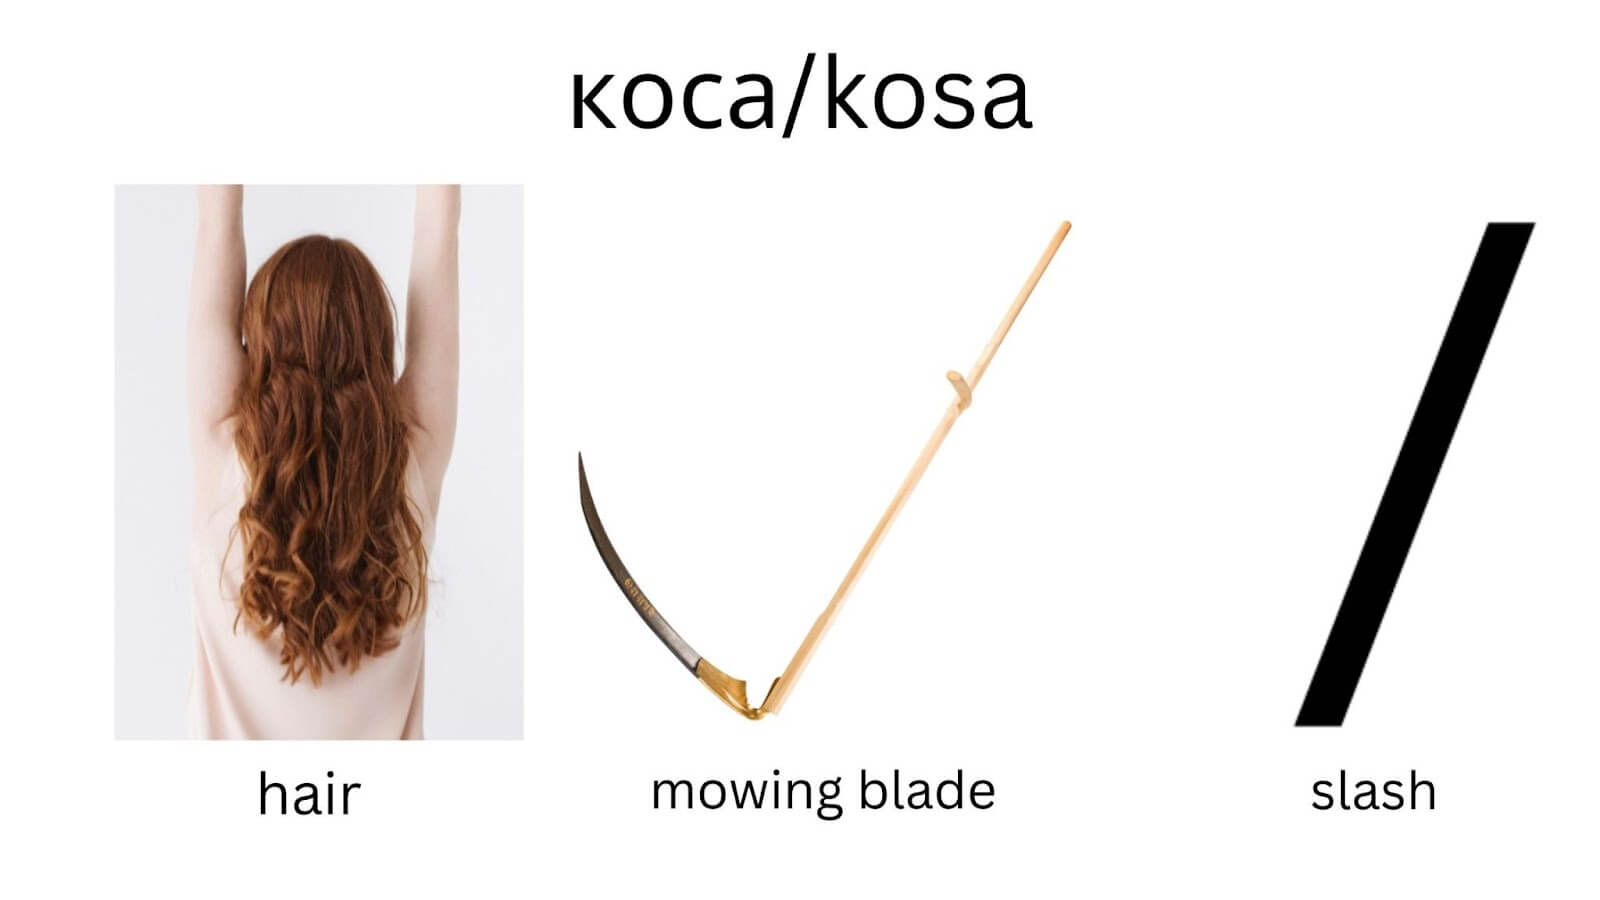 ‘kosa’ can mean many different things